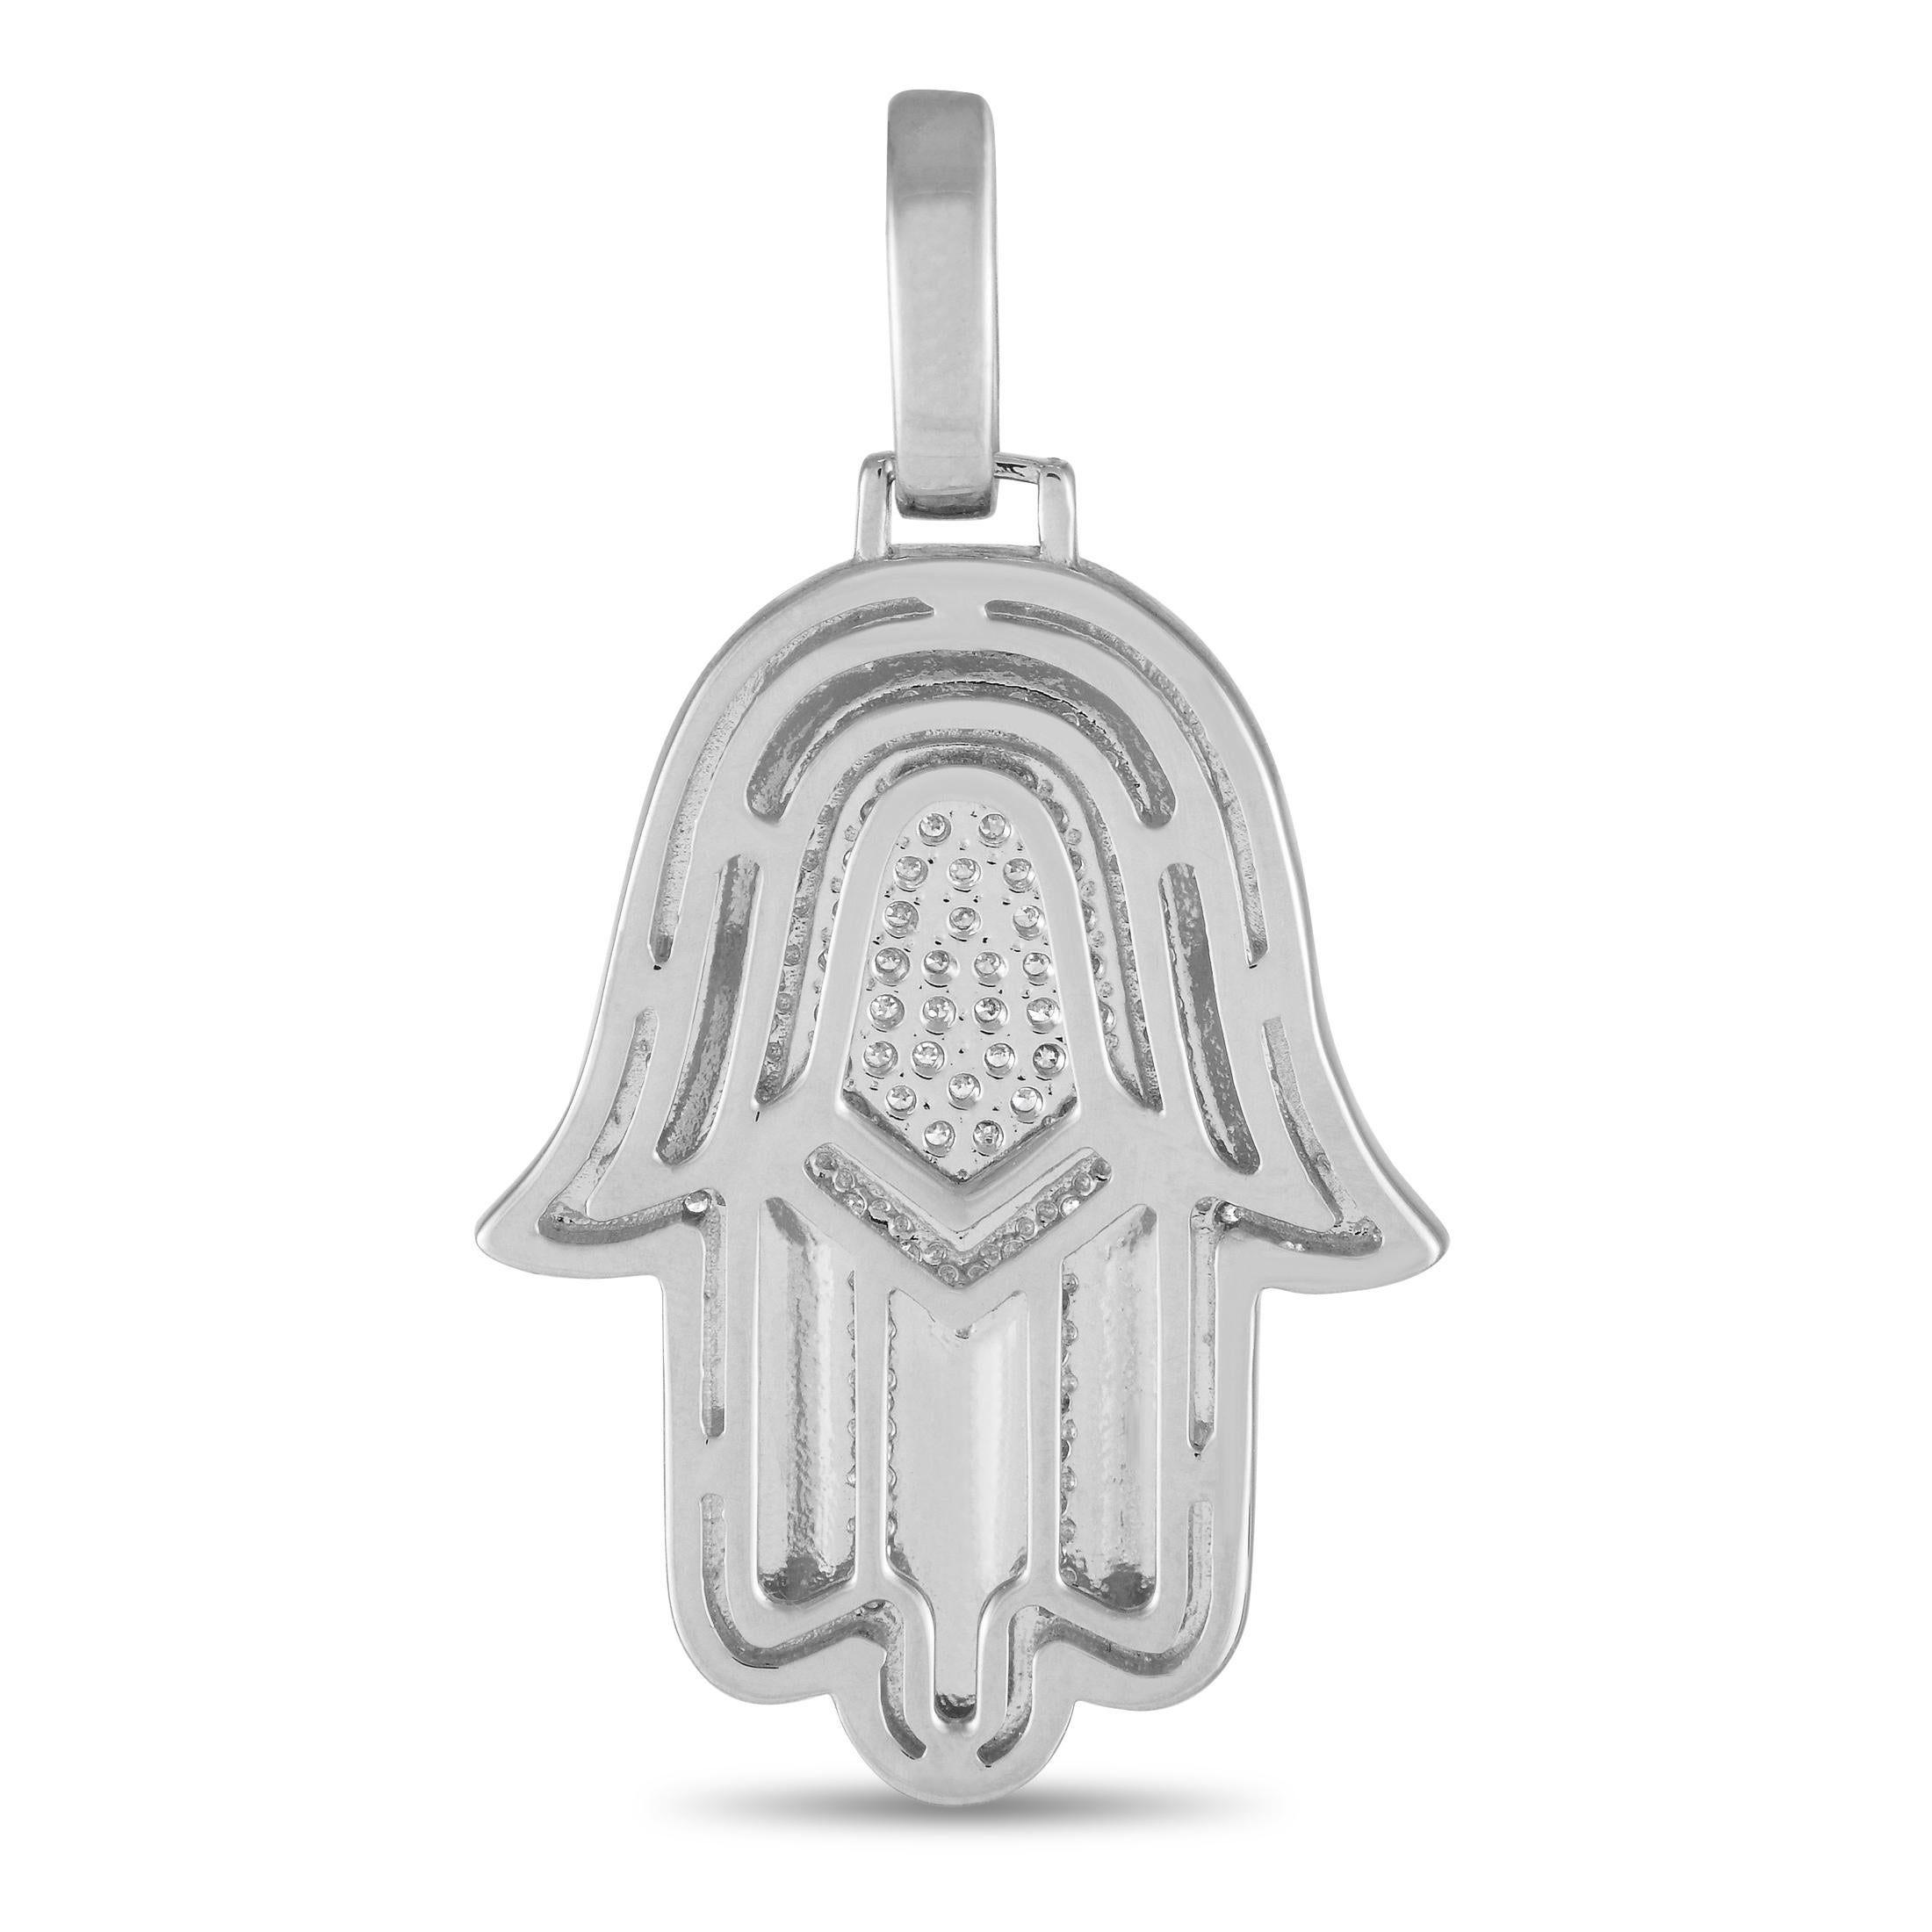 The traditional Hamsa symbol comes to life on this luxurious 14K white gold pendant. Simple, elegant, and statement-making, it measures 1.45 long, 0.75 wide, and is elevated by sparkling diamonds totaling 0.50 carats.This jewelry piece is offered in